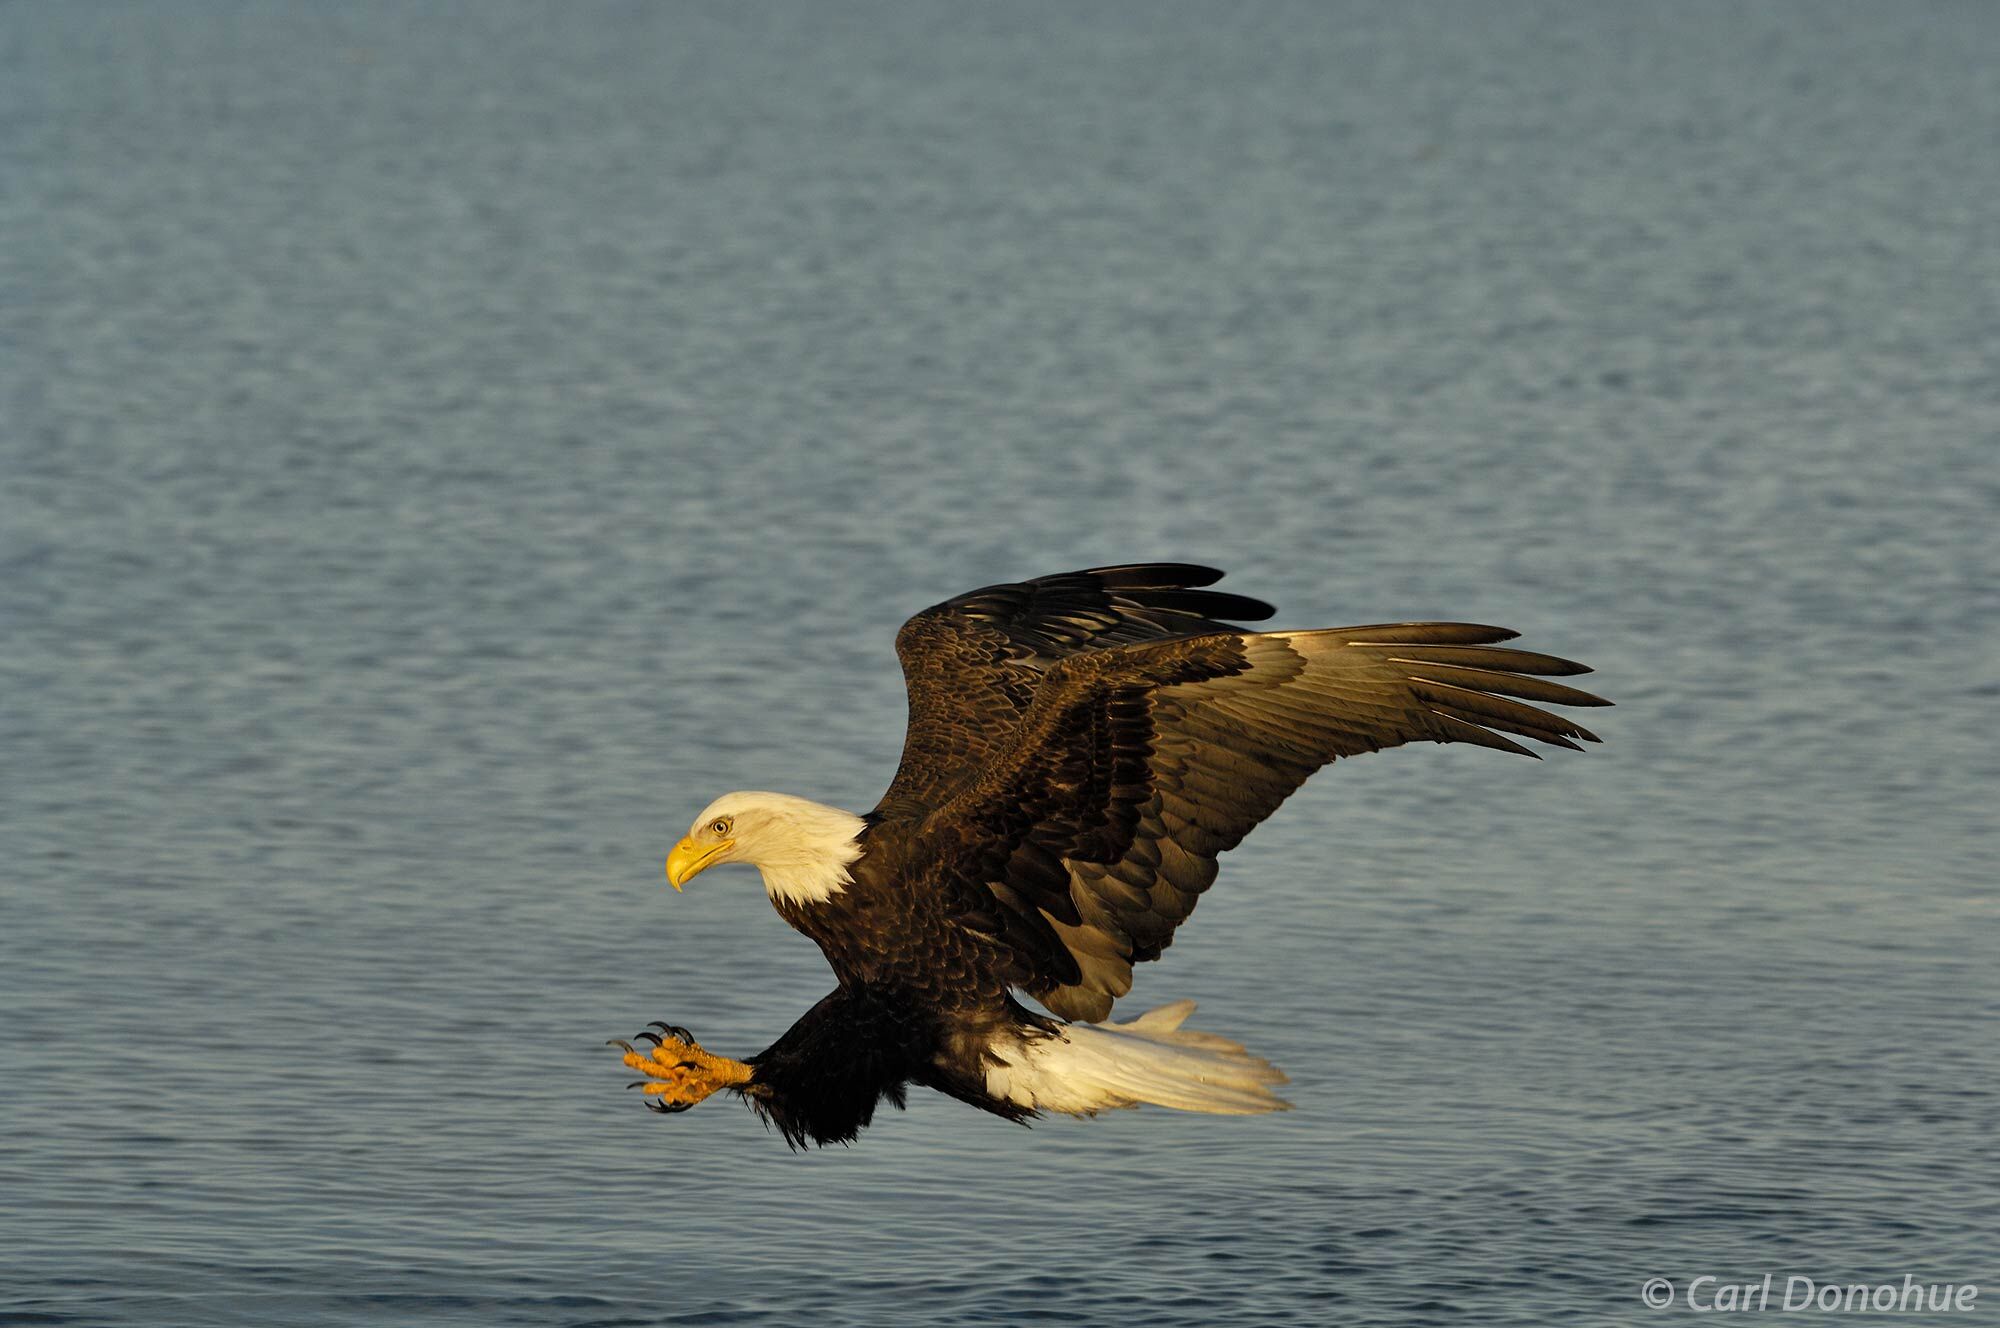 With its wings spread wide, this bald eagle slides in to snatch a fish from the water. A symbol of American strength and freedom...